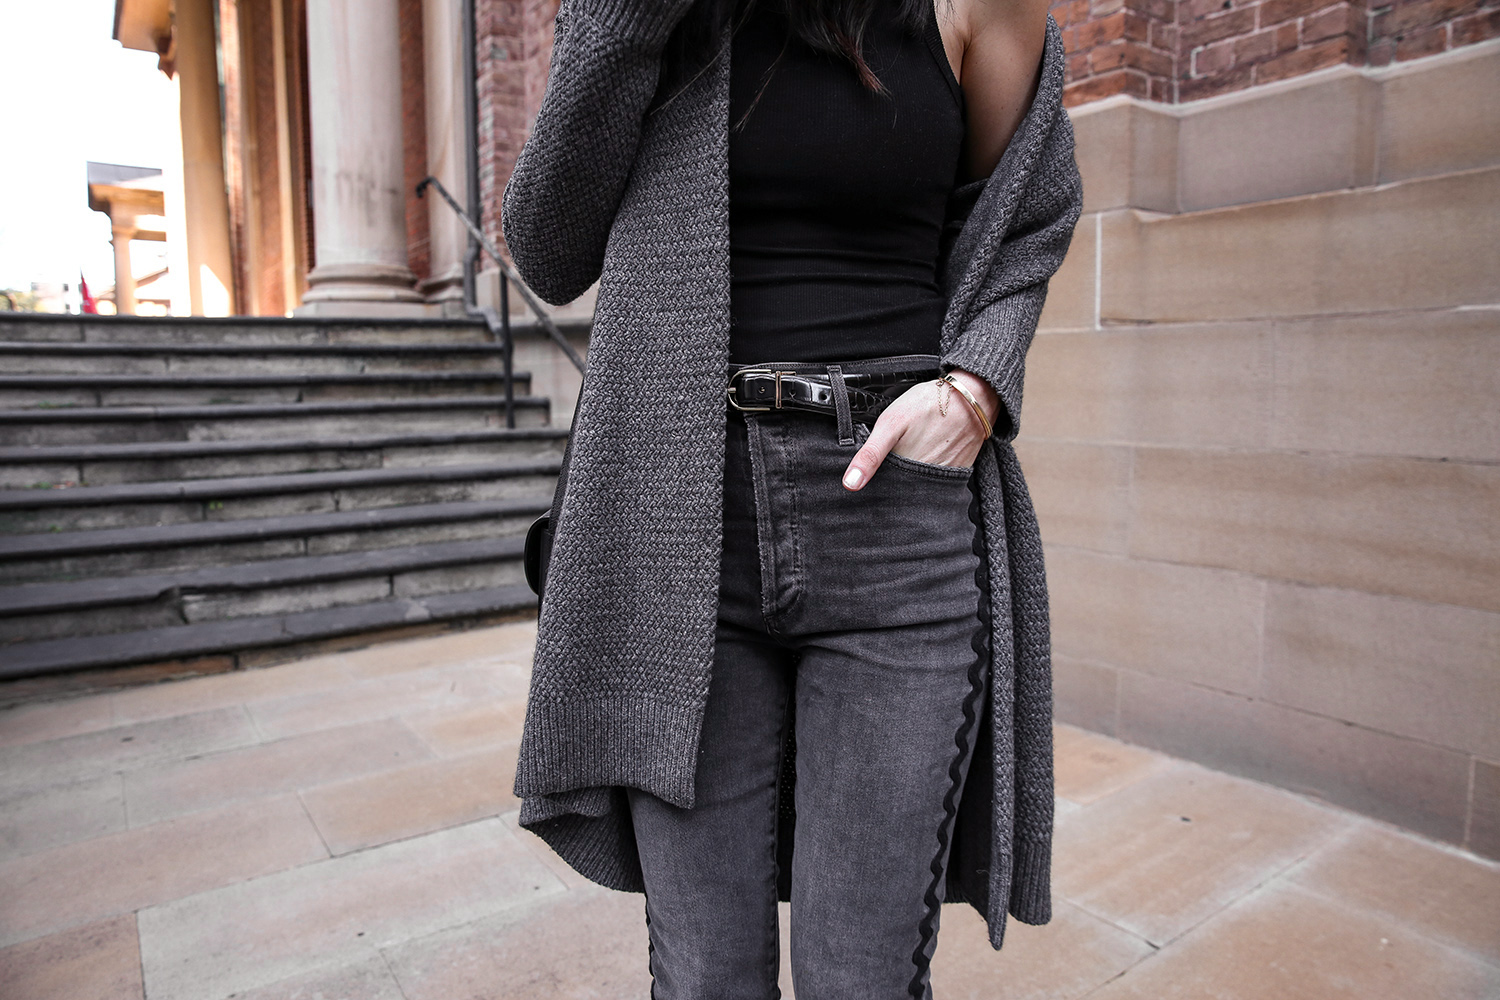 Jamie Lee of Mademoiselle wearing a black mock croc leather belt and Citizens of Humanity jeans